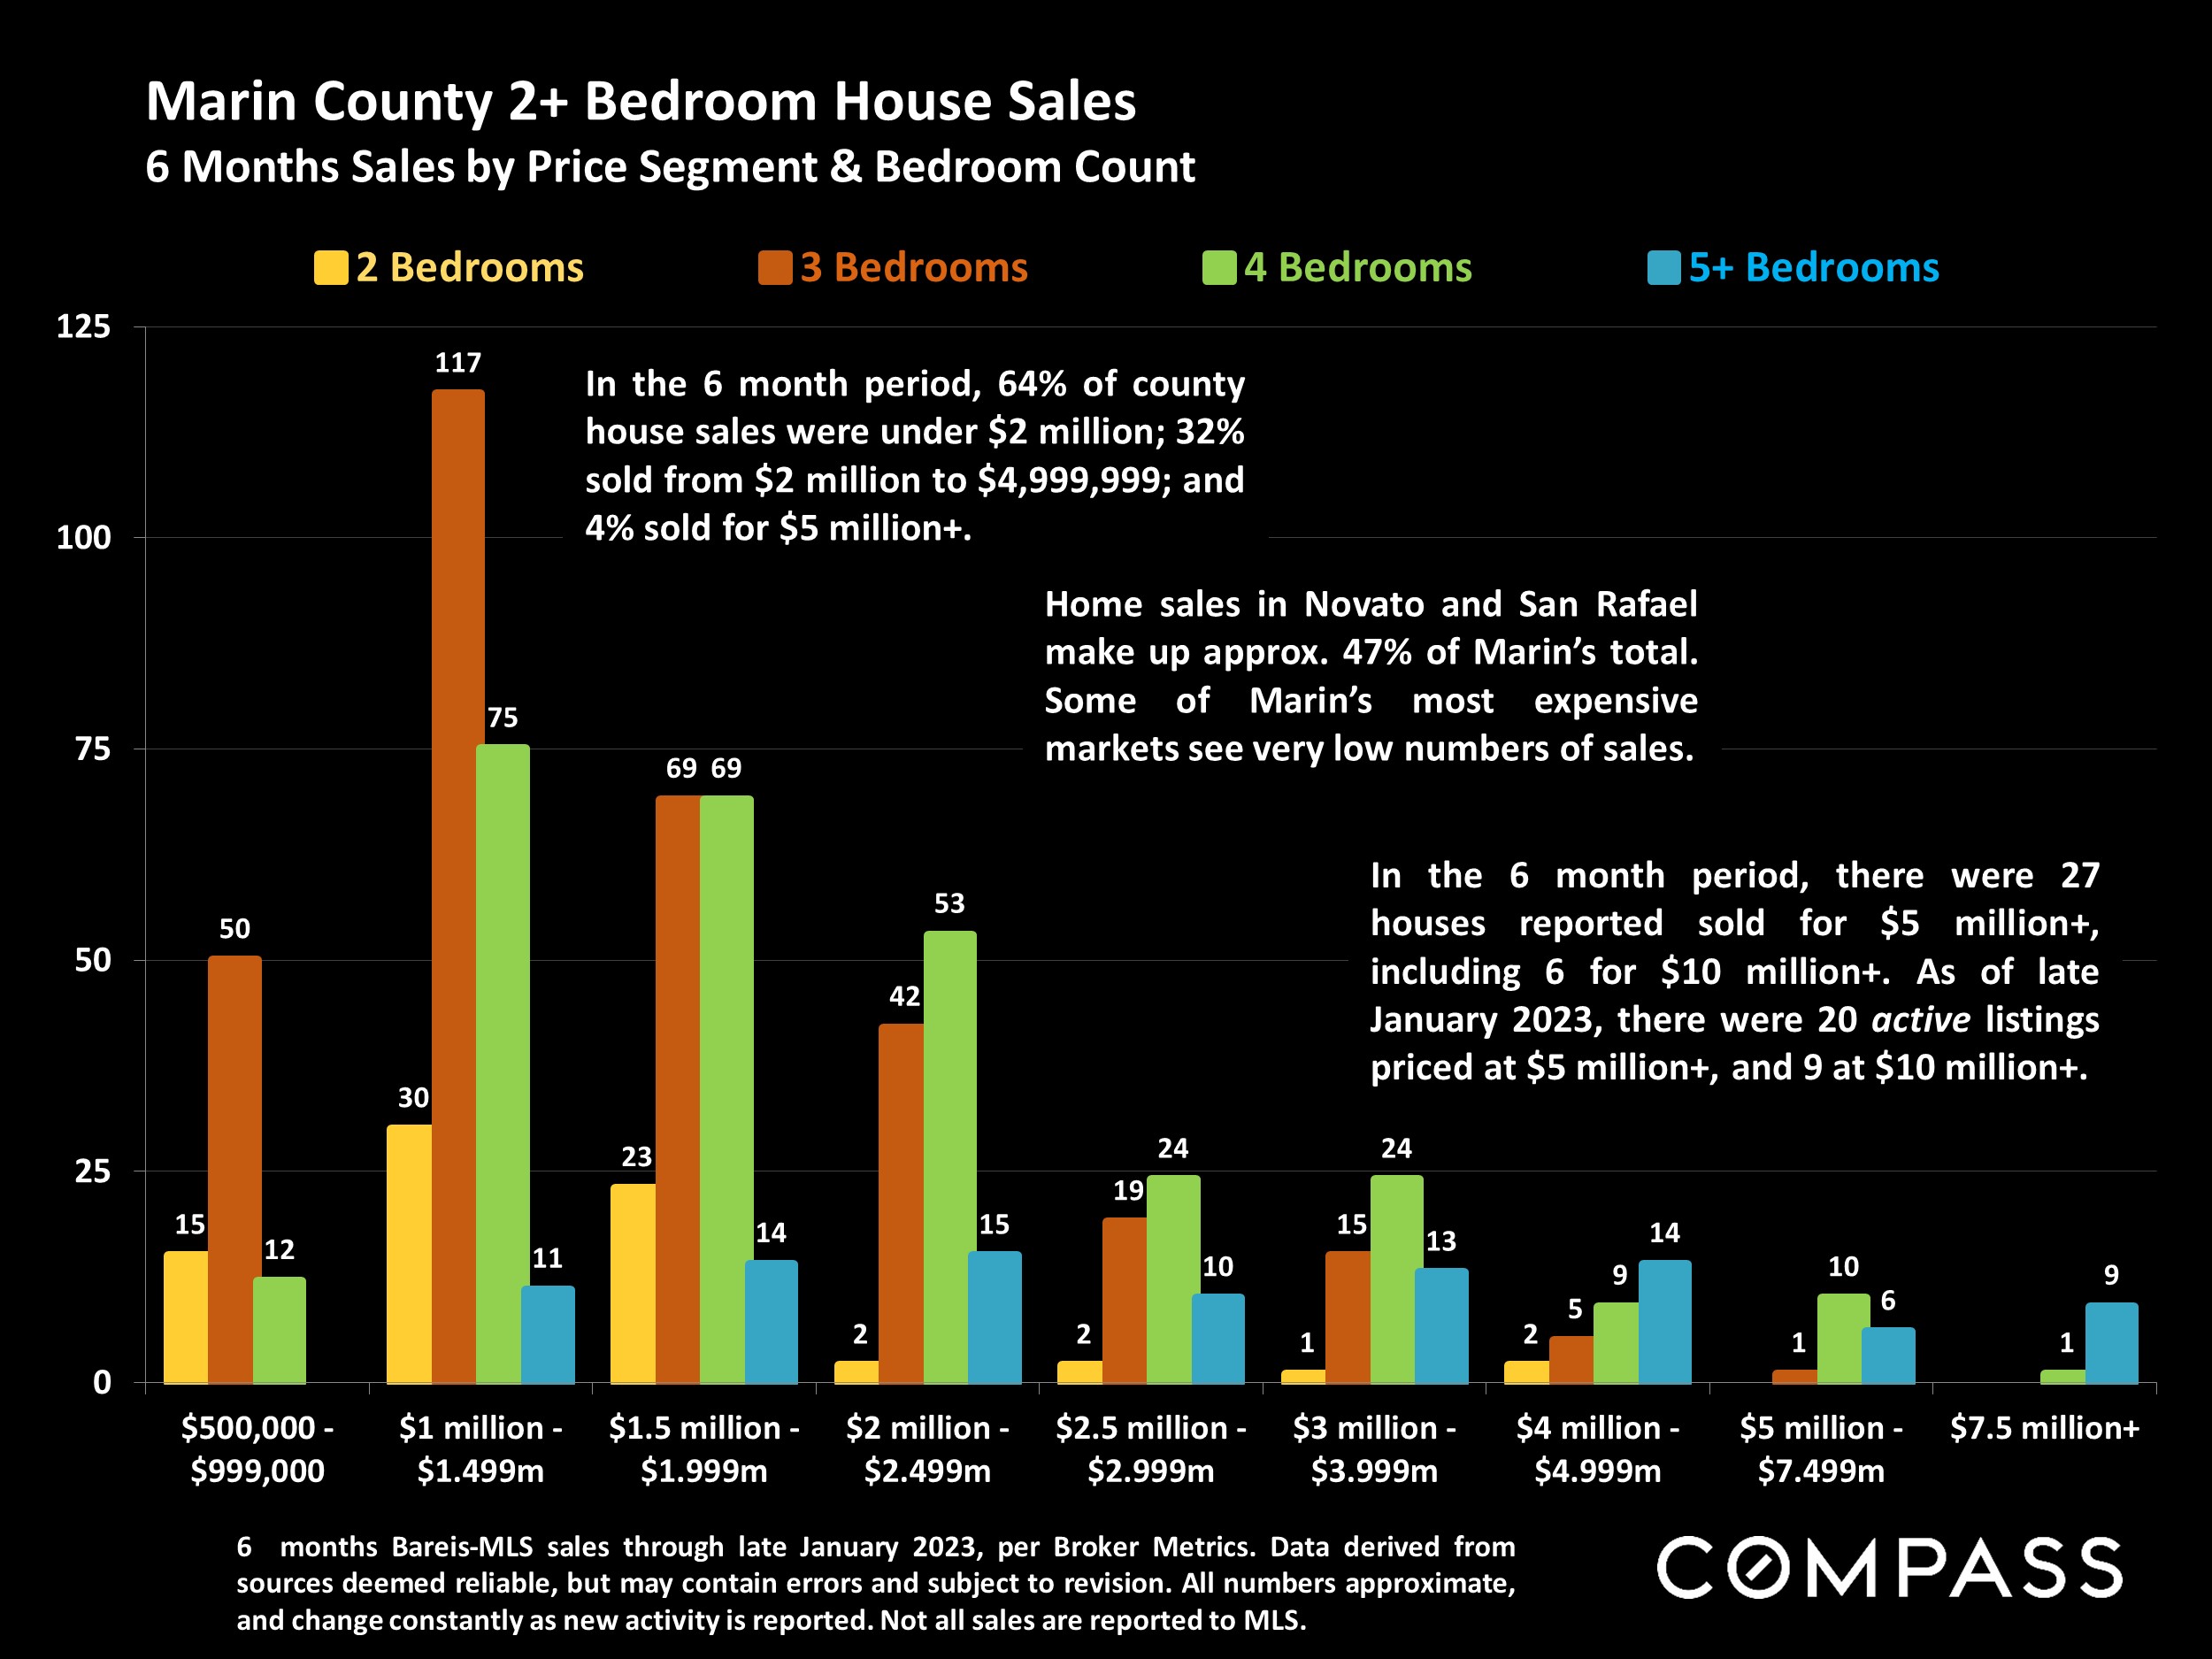 Marin County 2+ Bedroom House Sales 6 Months Sales by Price Segment & Bedroom Count